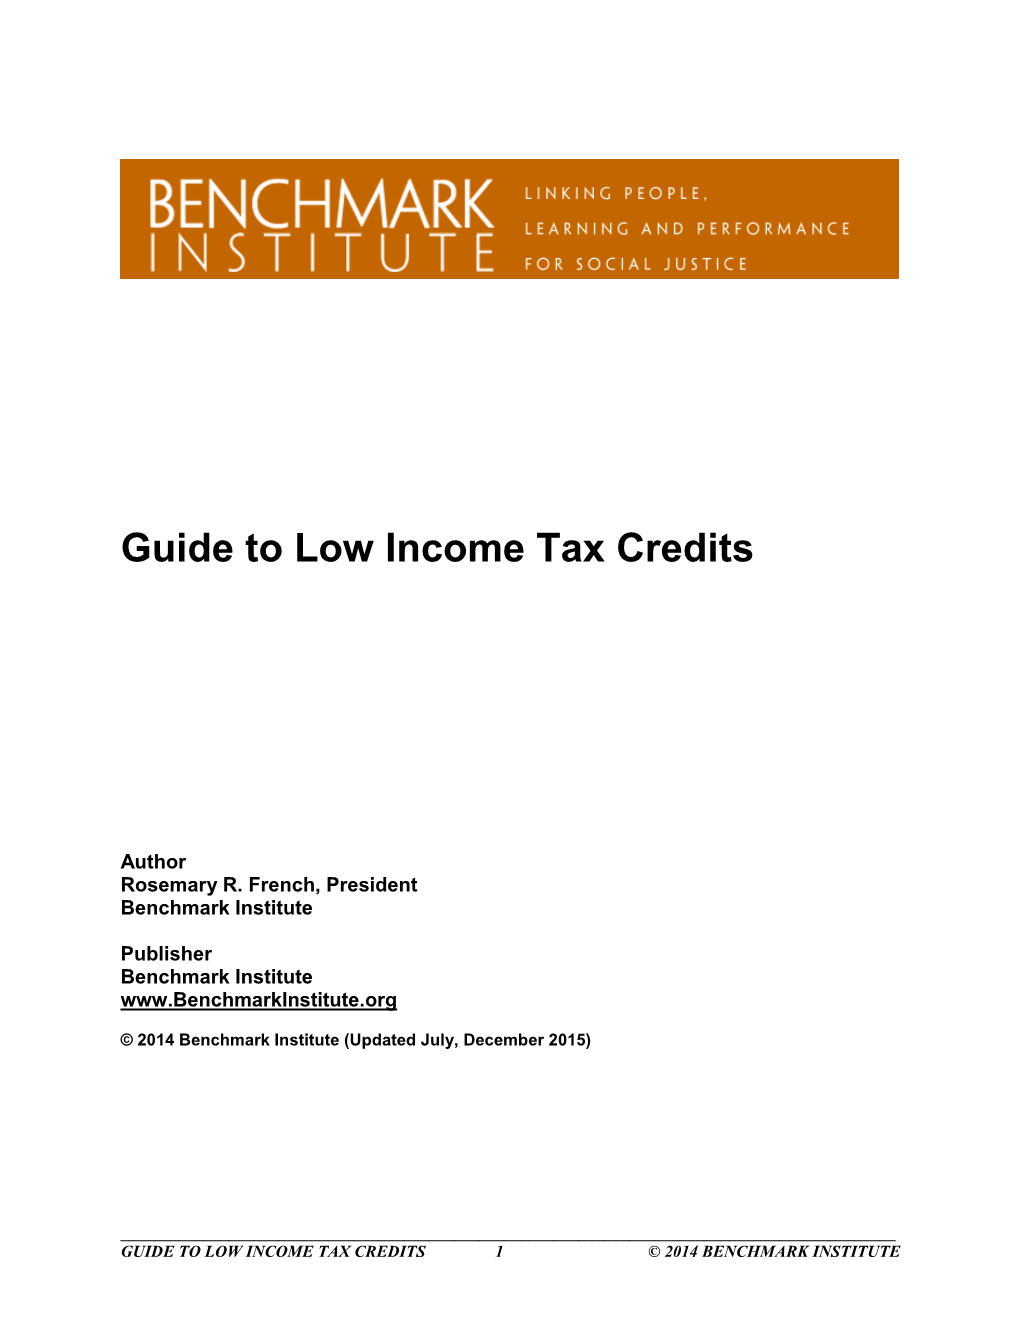 Guide to Low Income Tax Credits